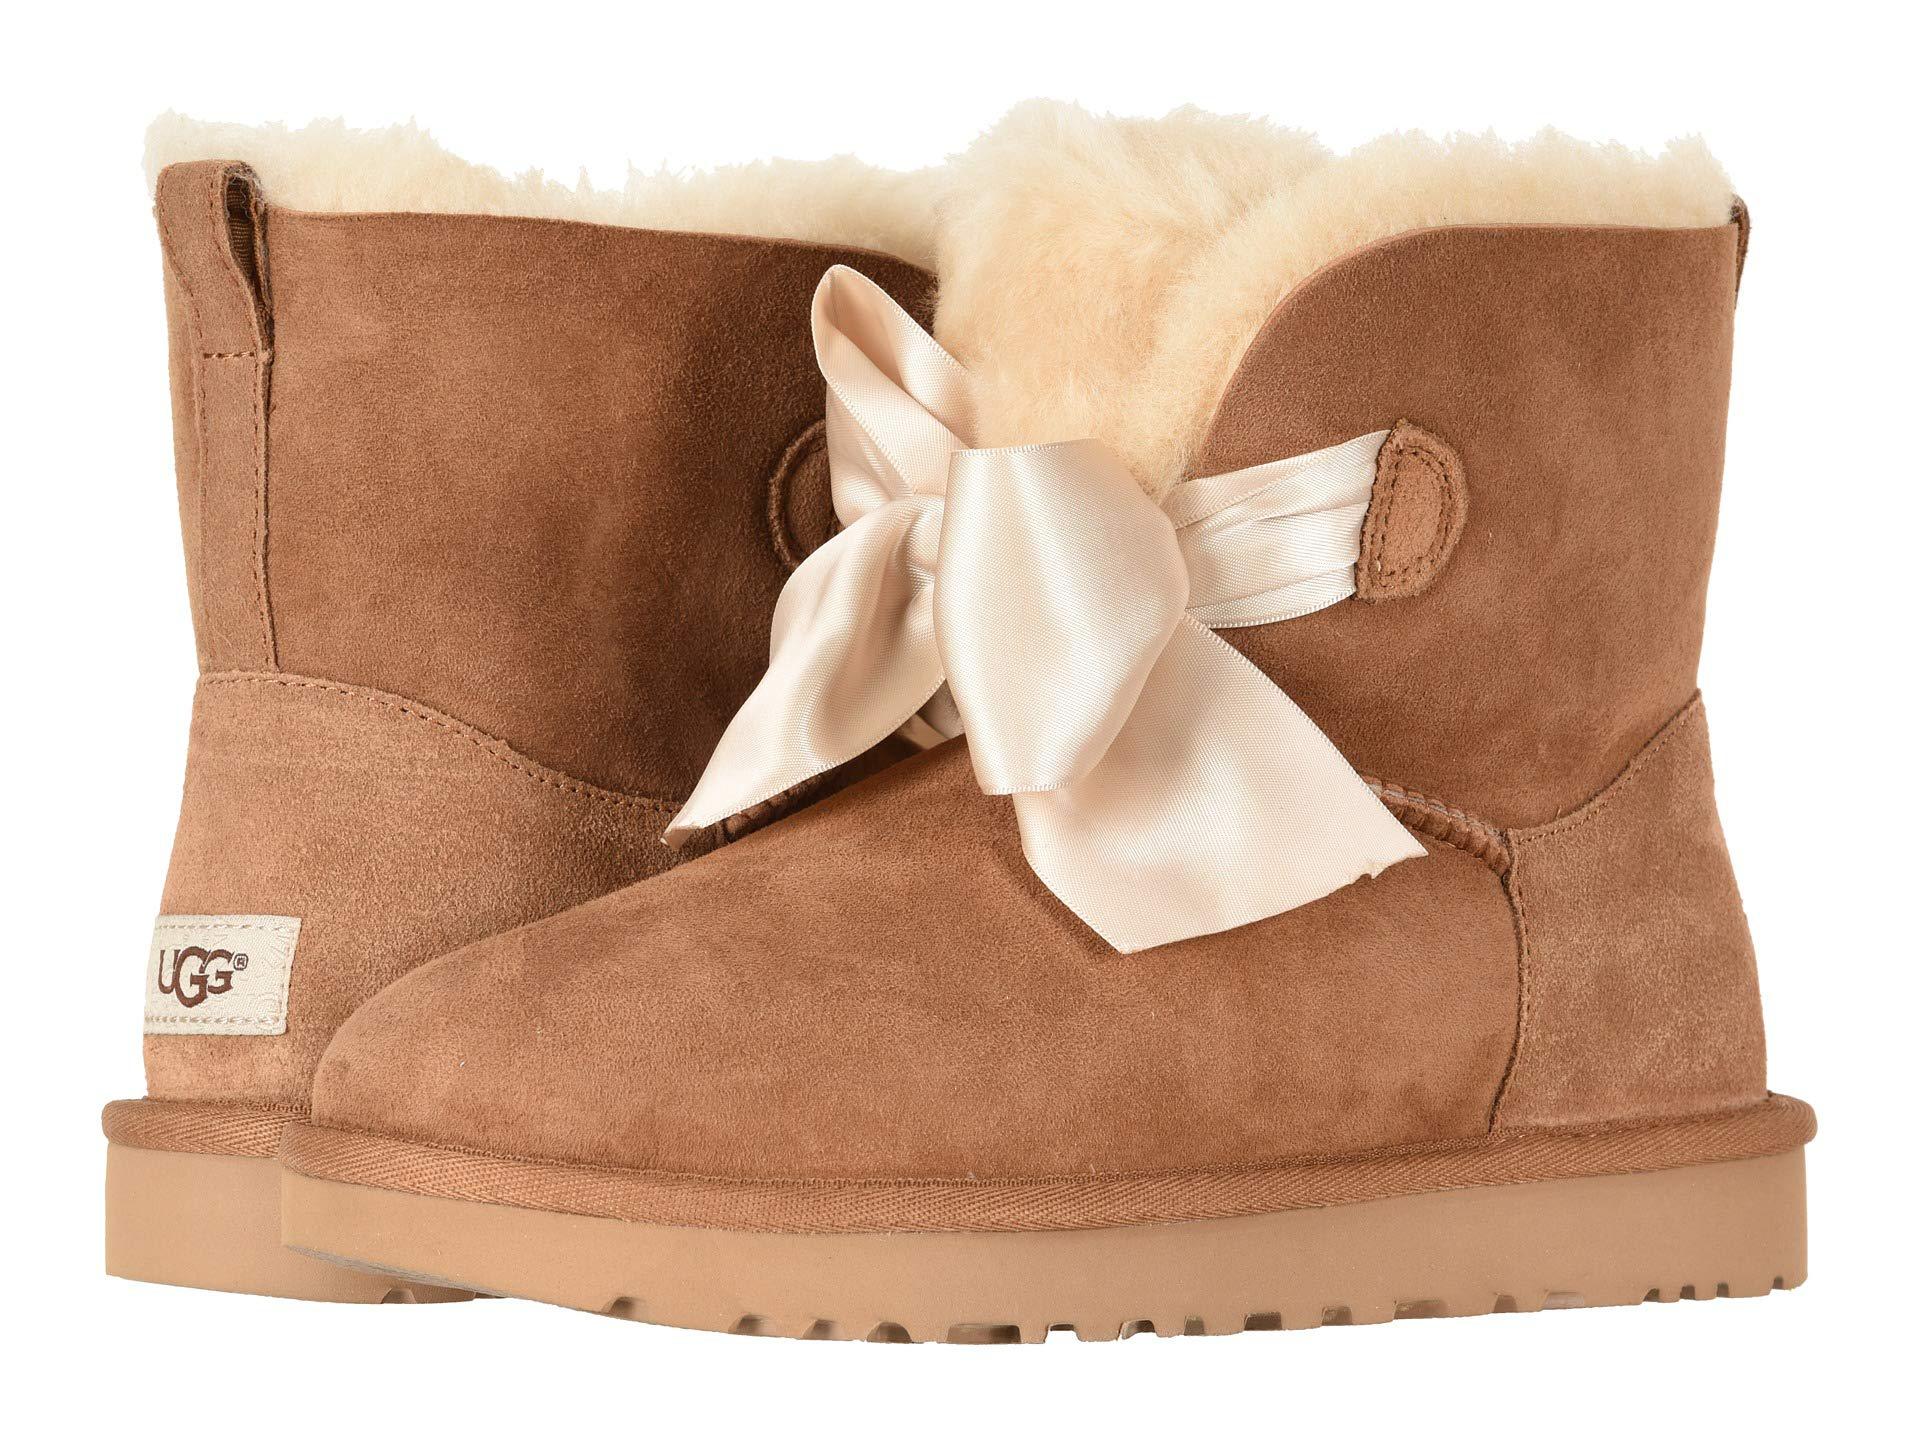 ugg boots with bow in front